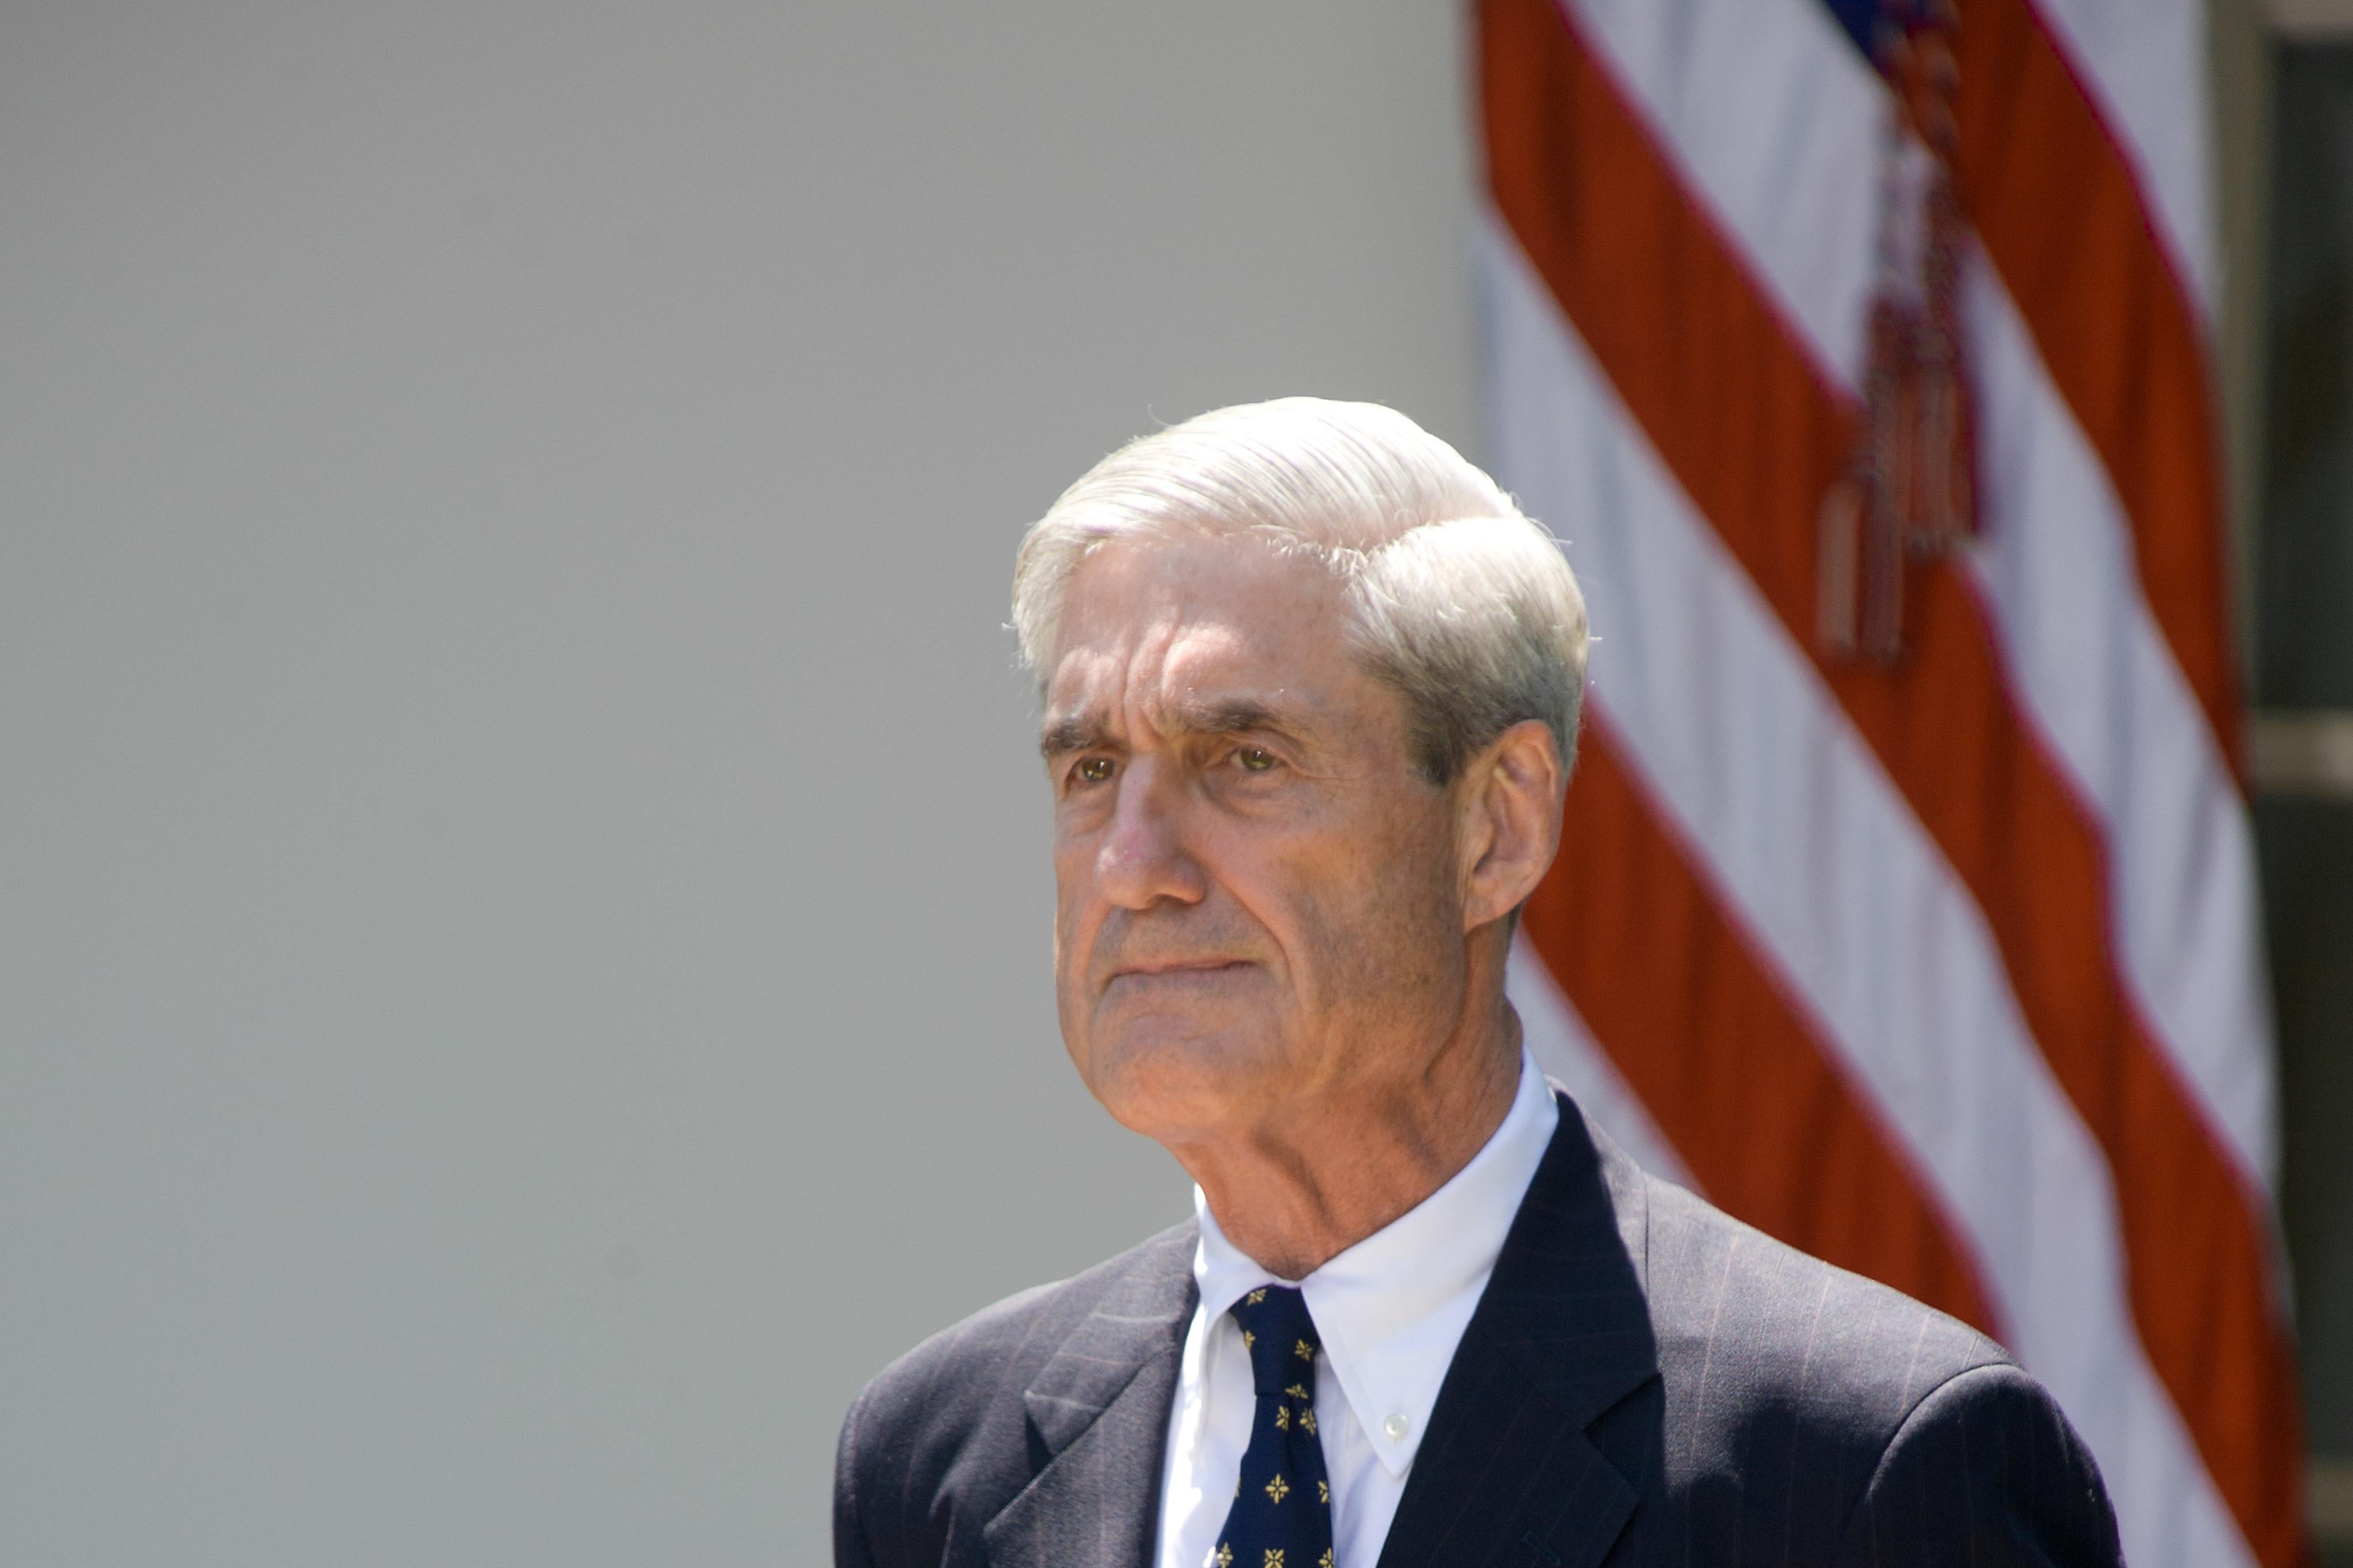 Robert Mueller at the White House in 2013.